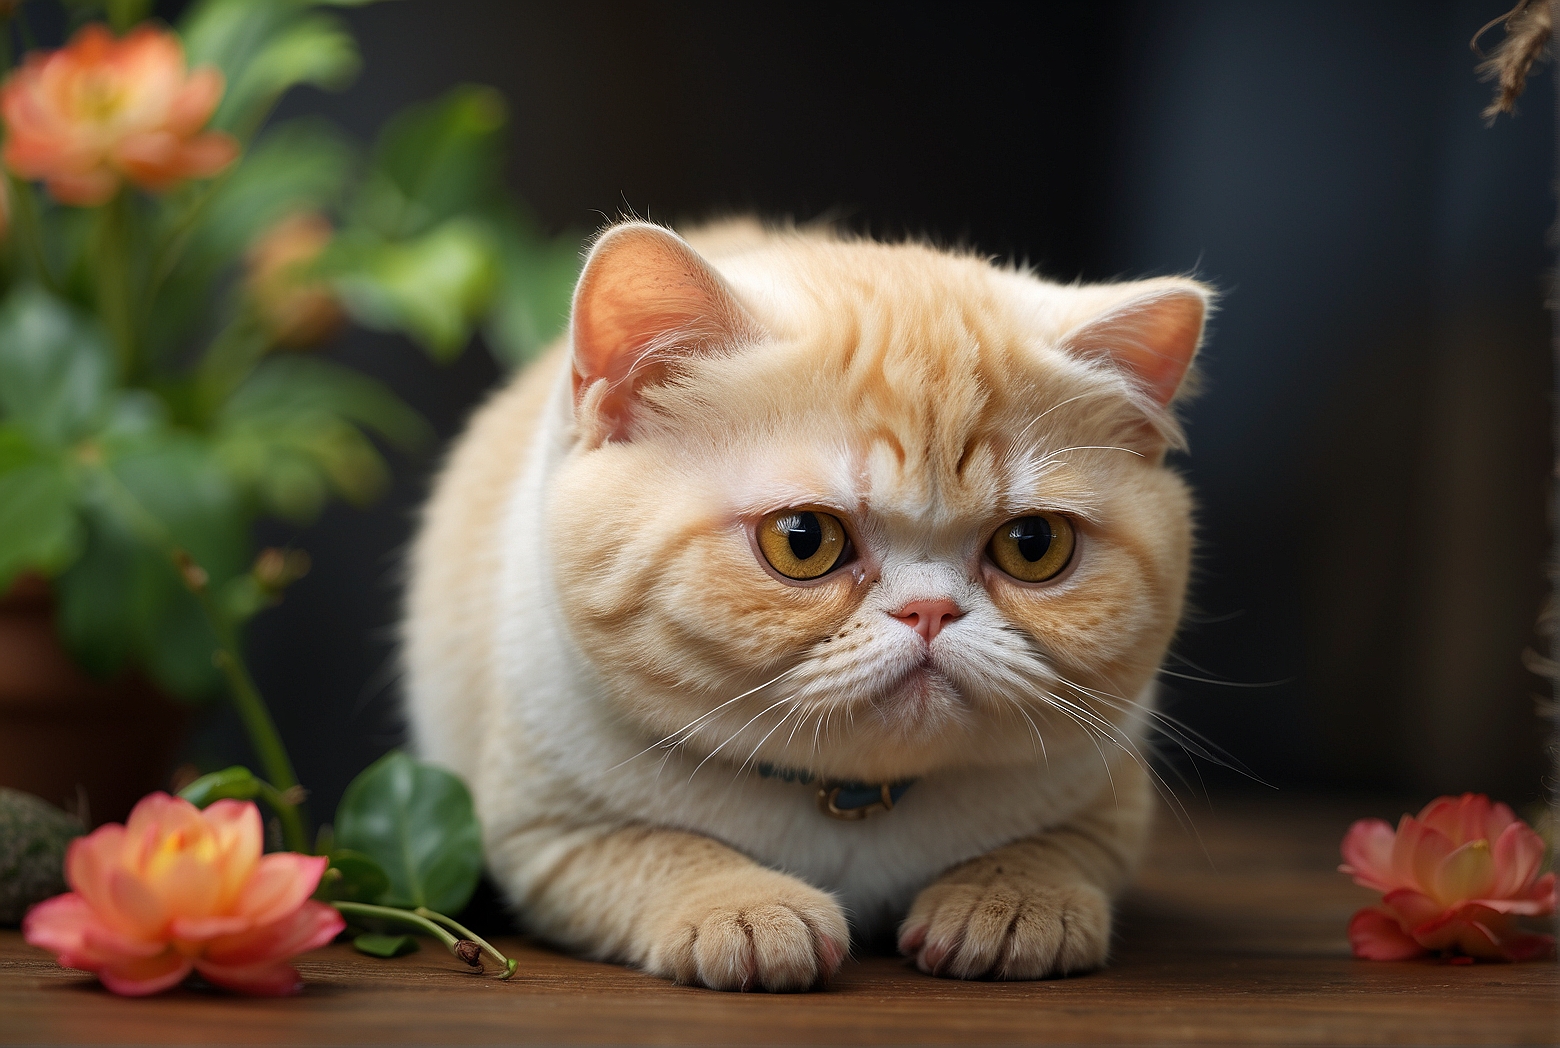 Where Do Exotic Shorthairs Come From?